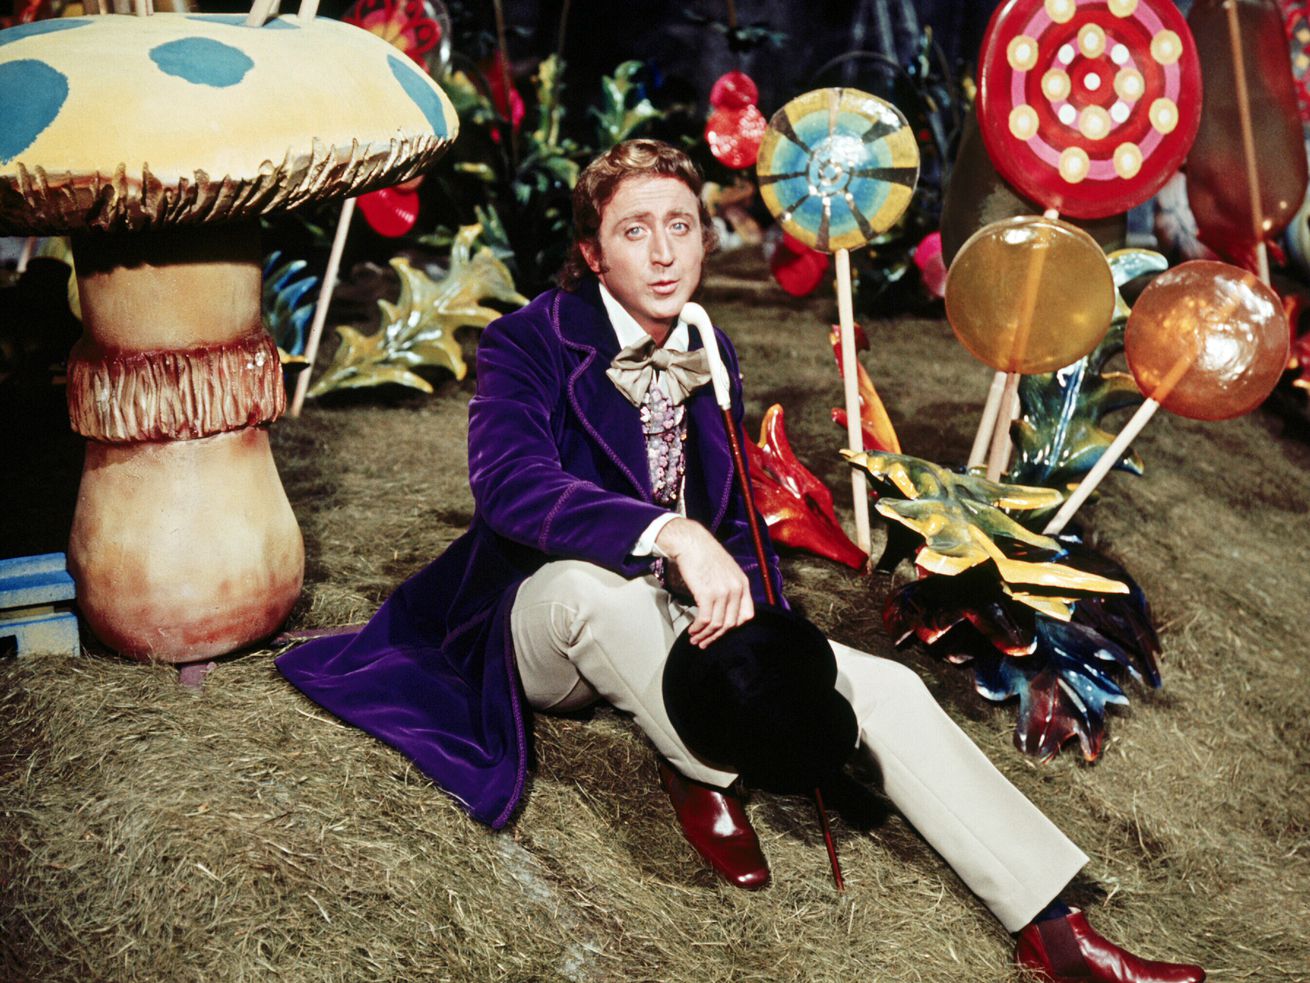 Wilder dressed in a purple coat as Wonka sits among oversize lollipops and mushrooms.